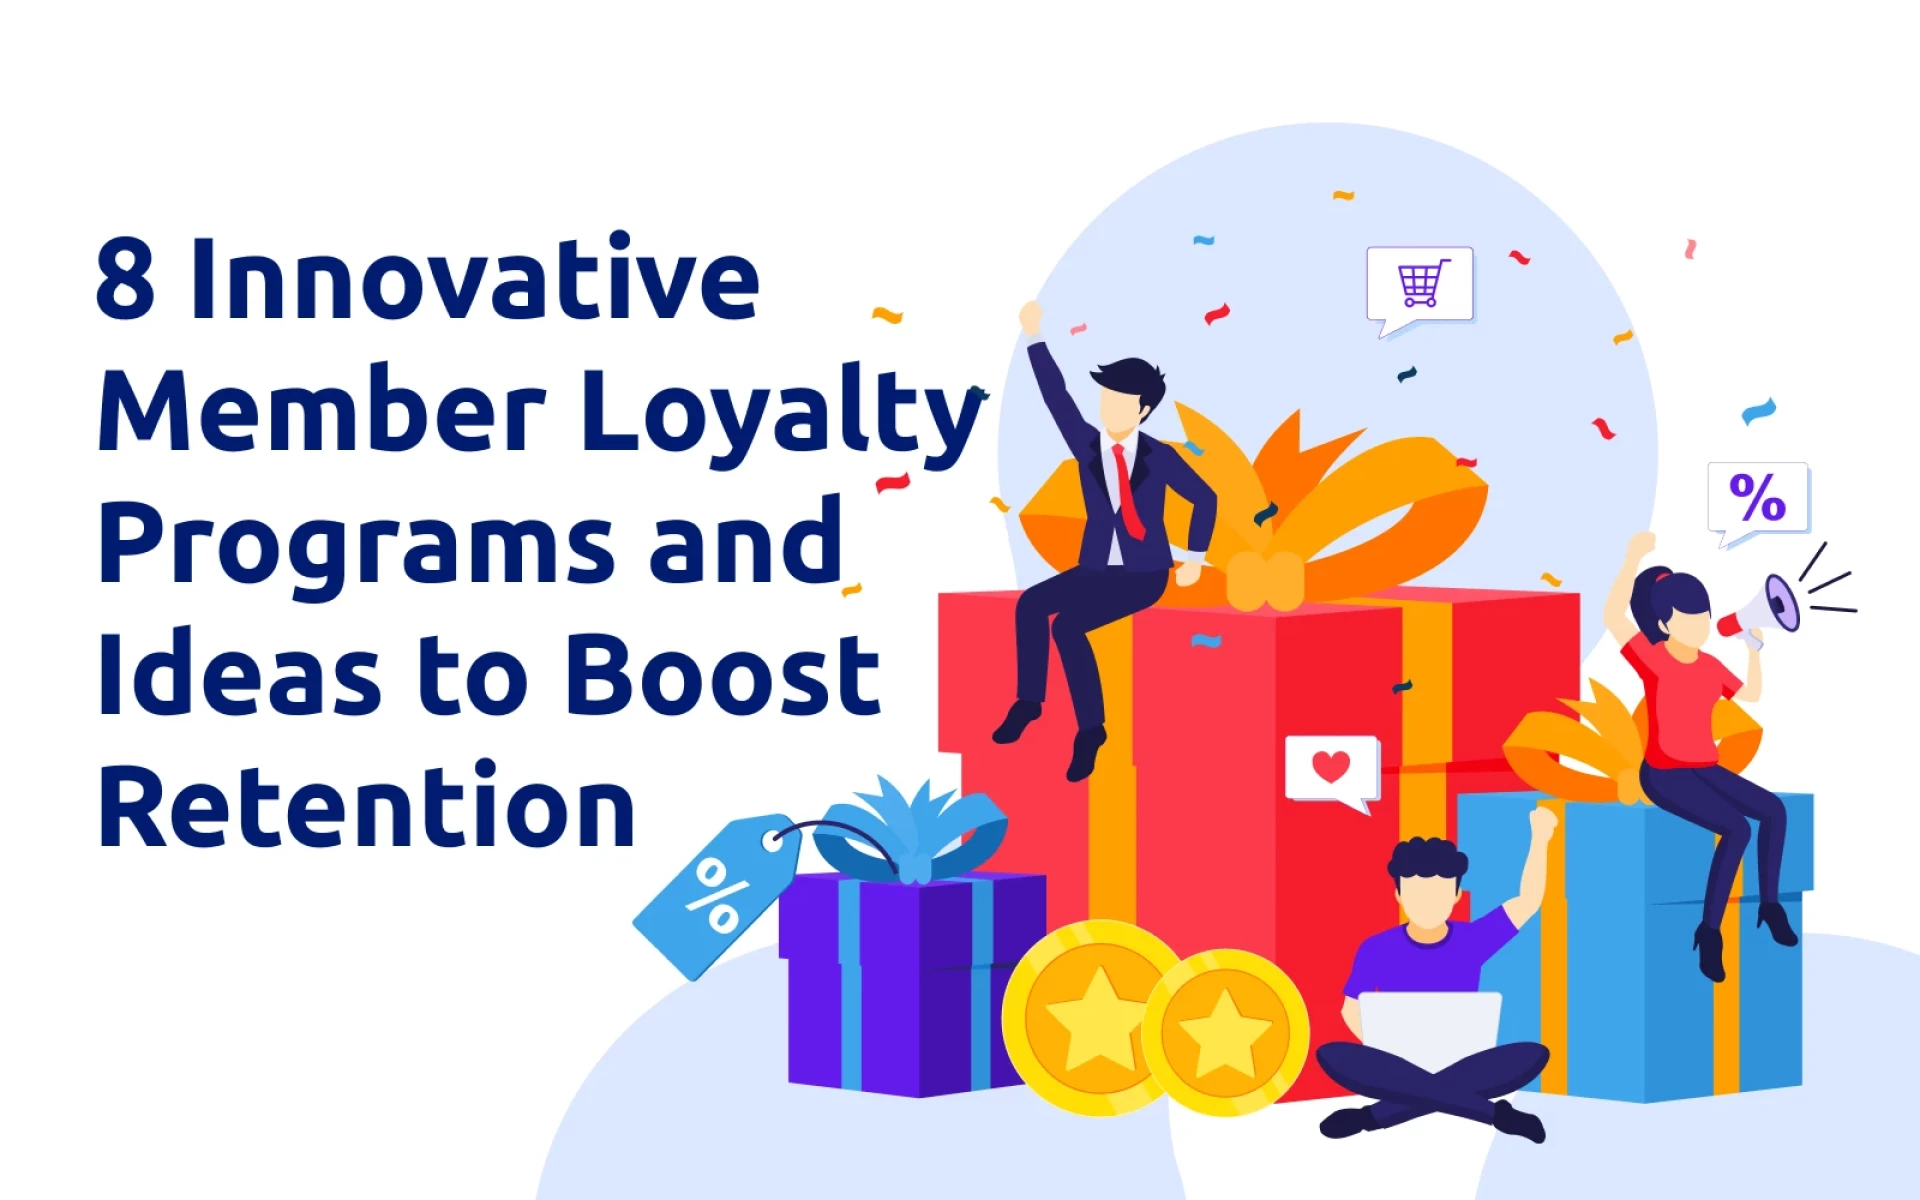 8 Innovative Member Loyalty Programs and Ideas to Boost Retention [with Pros, Cons, and Examples]